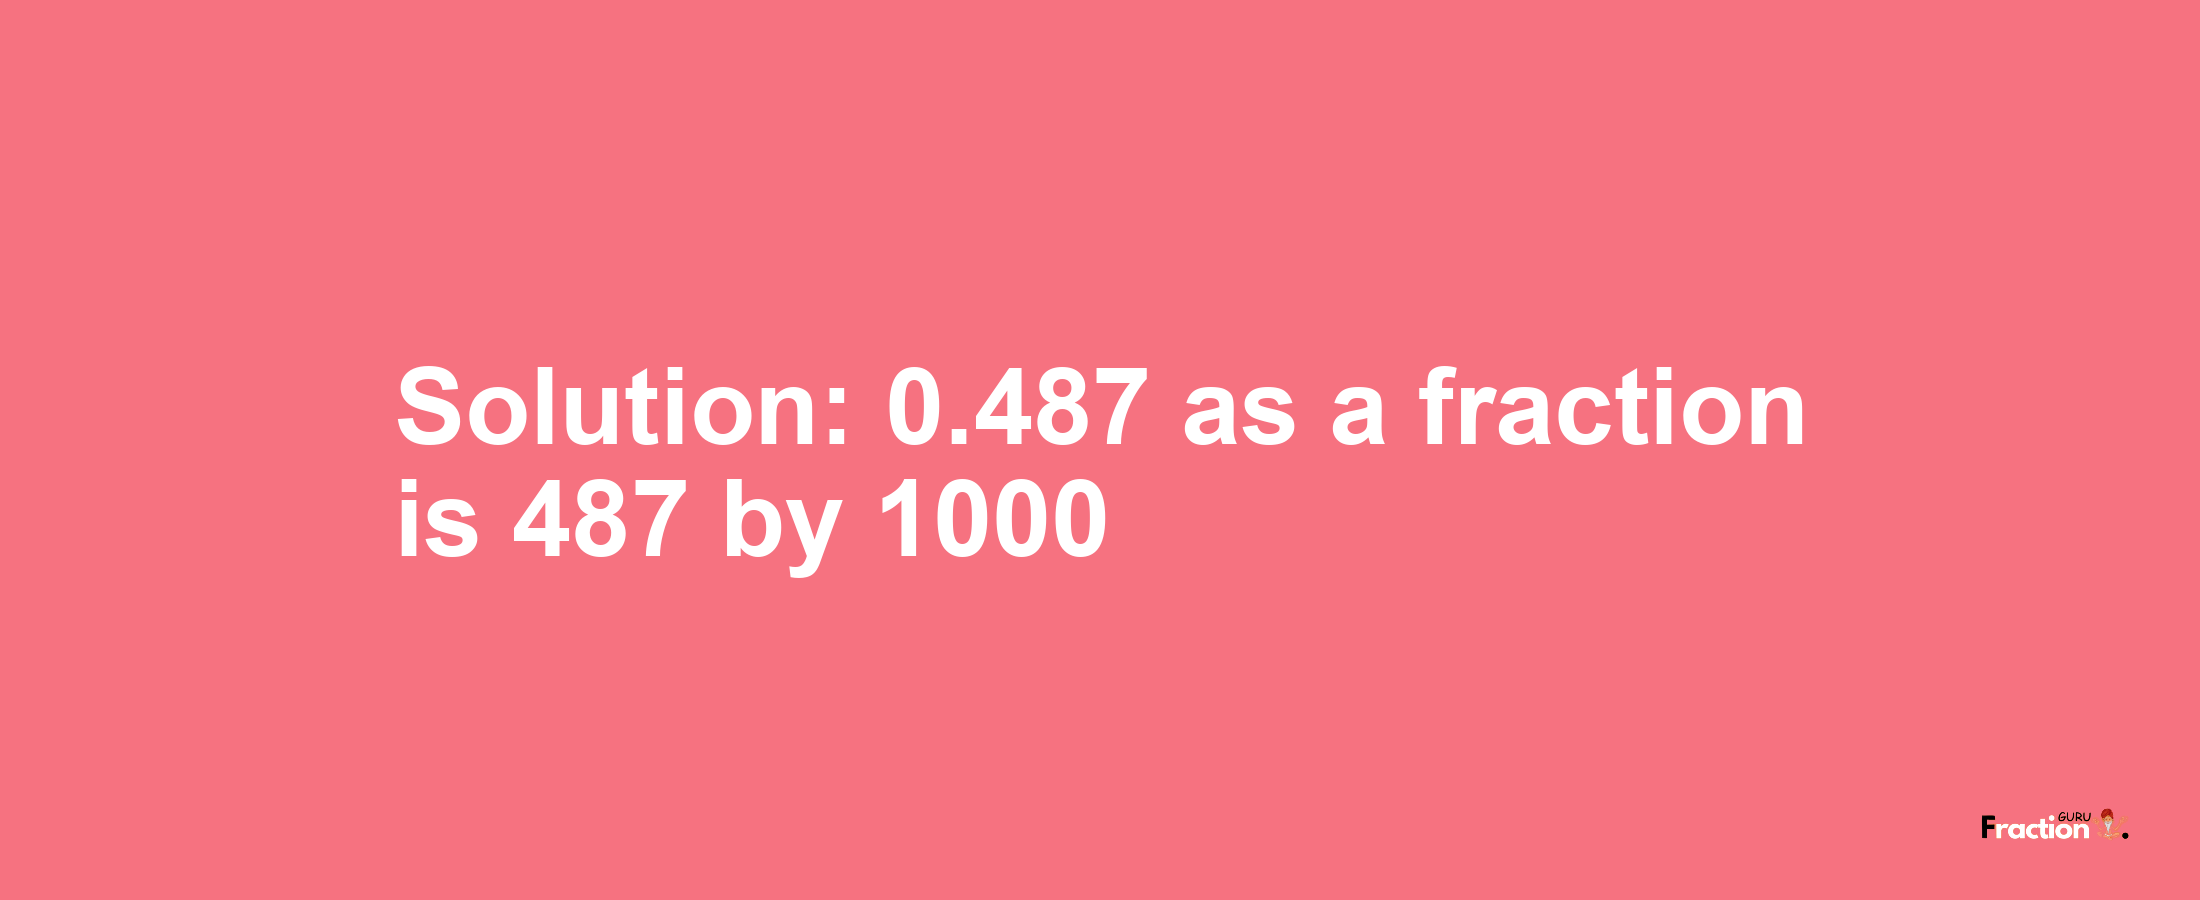 Solution:0.487 as a fraction is 487/1000